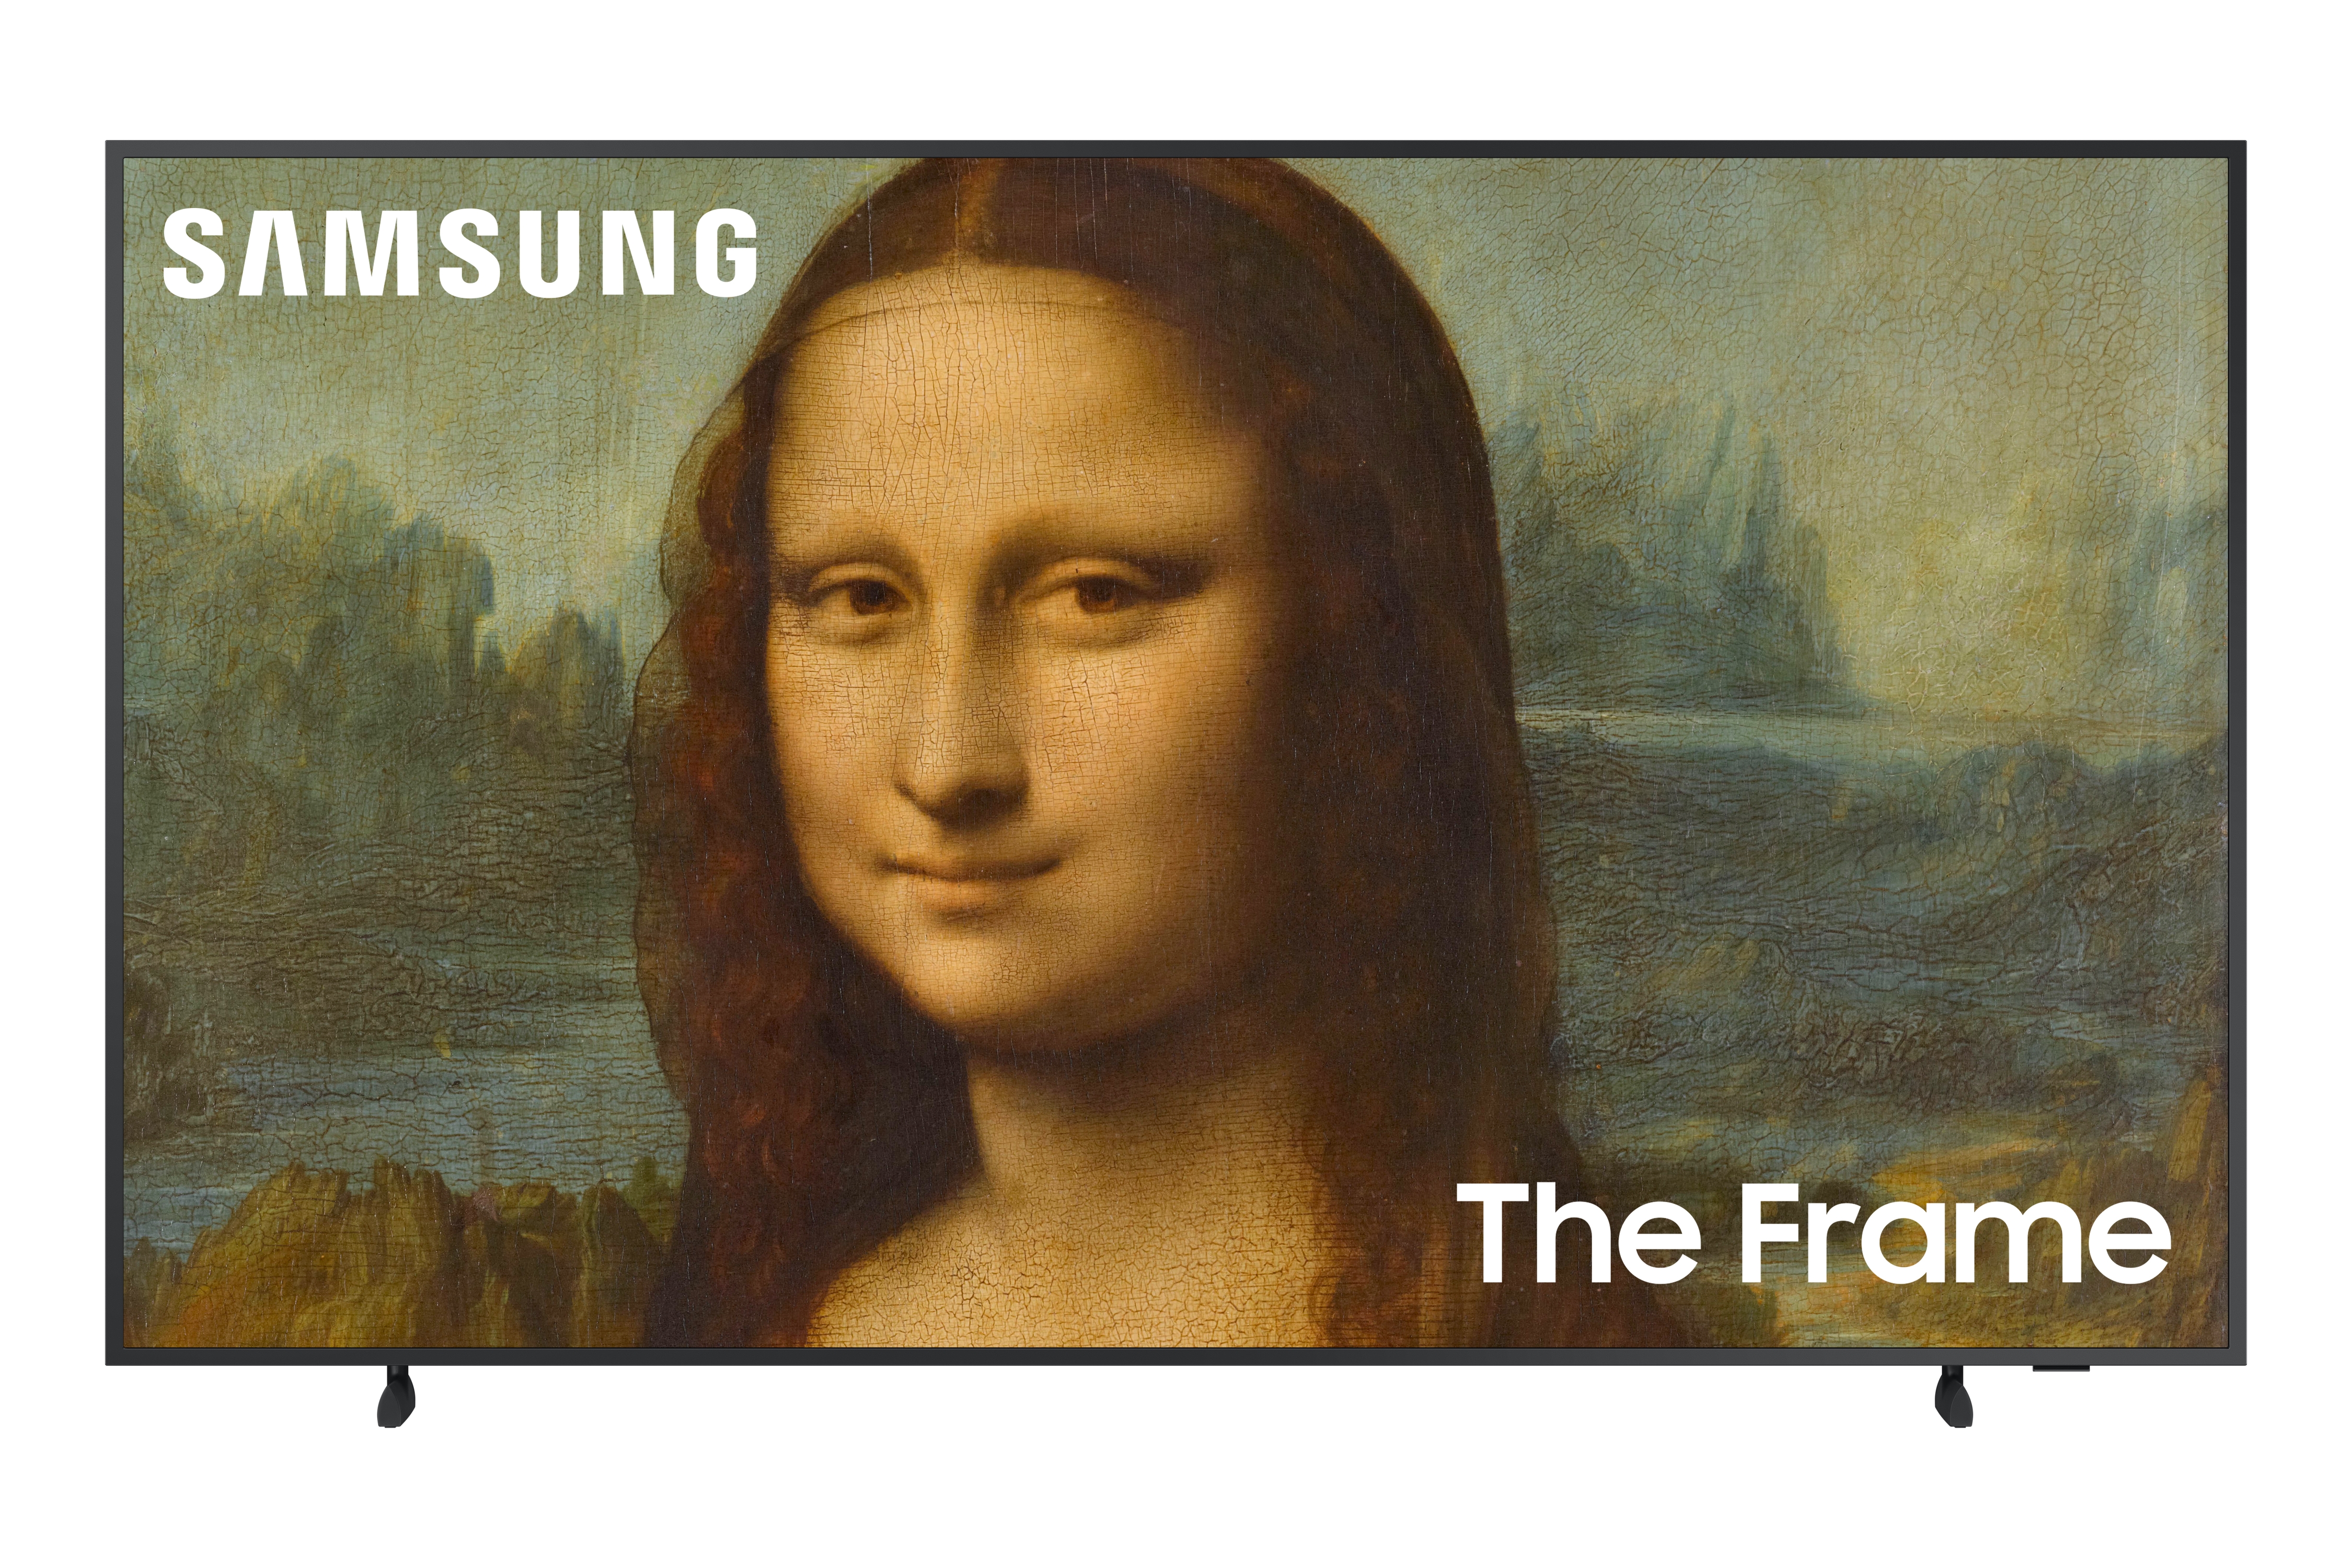 https://image-us.samsung.com/SamsungUS/home/television-home-theater/tvs/the-frame/03072022/frame-gal_001_Front1_Black.jpg?$product-details-zoomed-png$